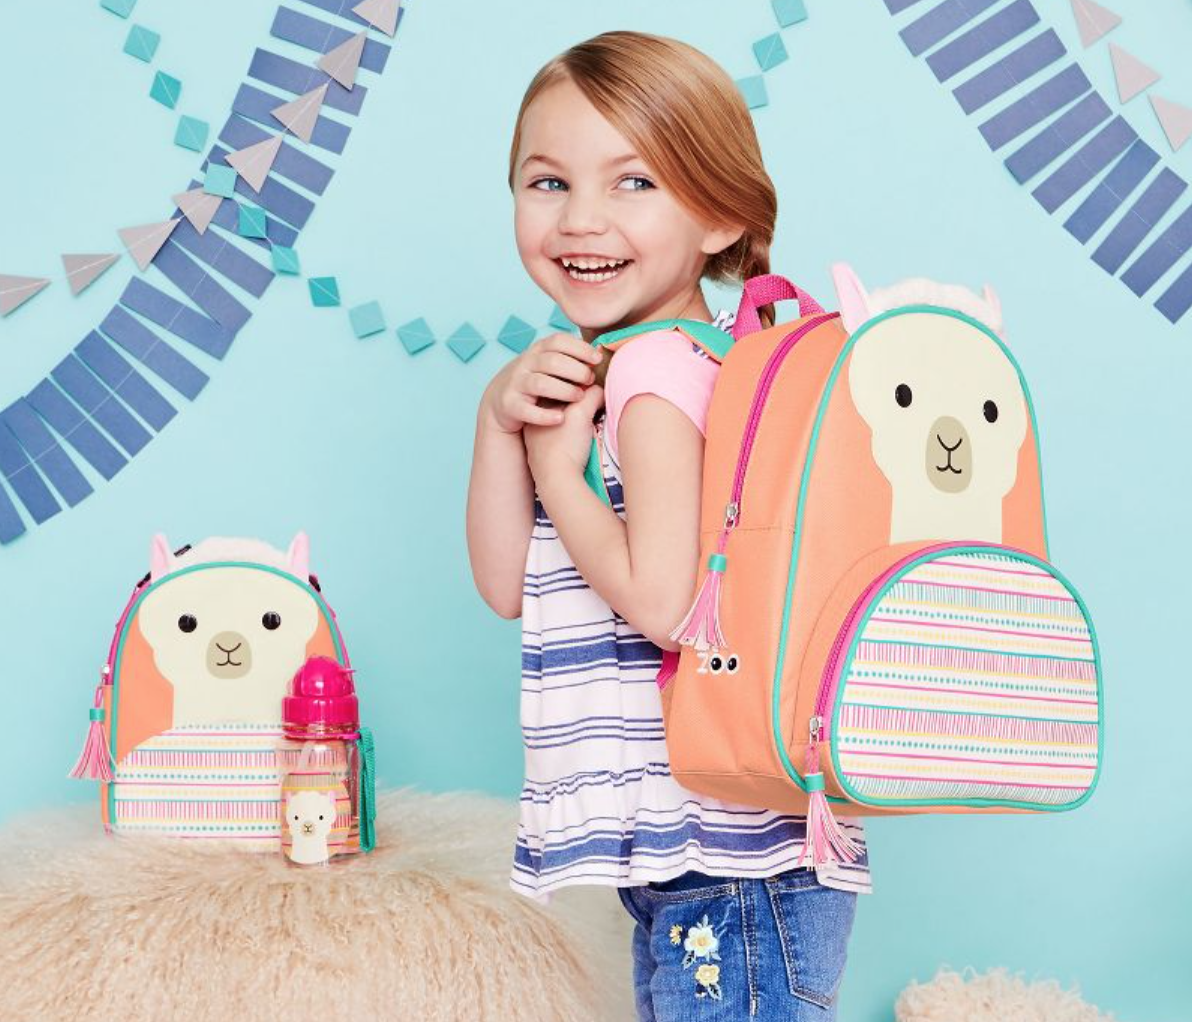 10 Best Toddler Backpacks - Backpacks for Daycare, Pre-K and Play